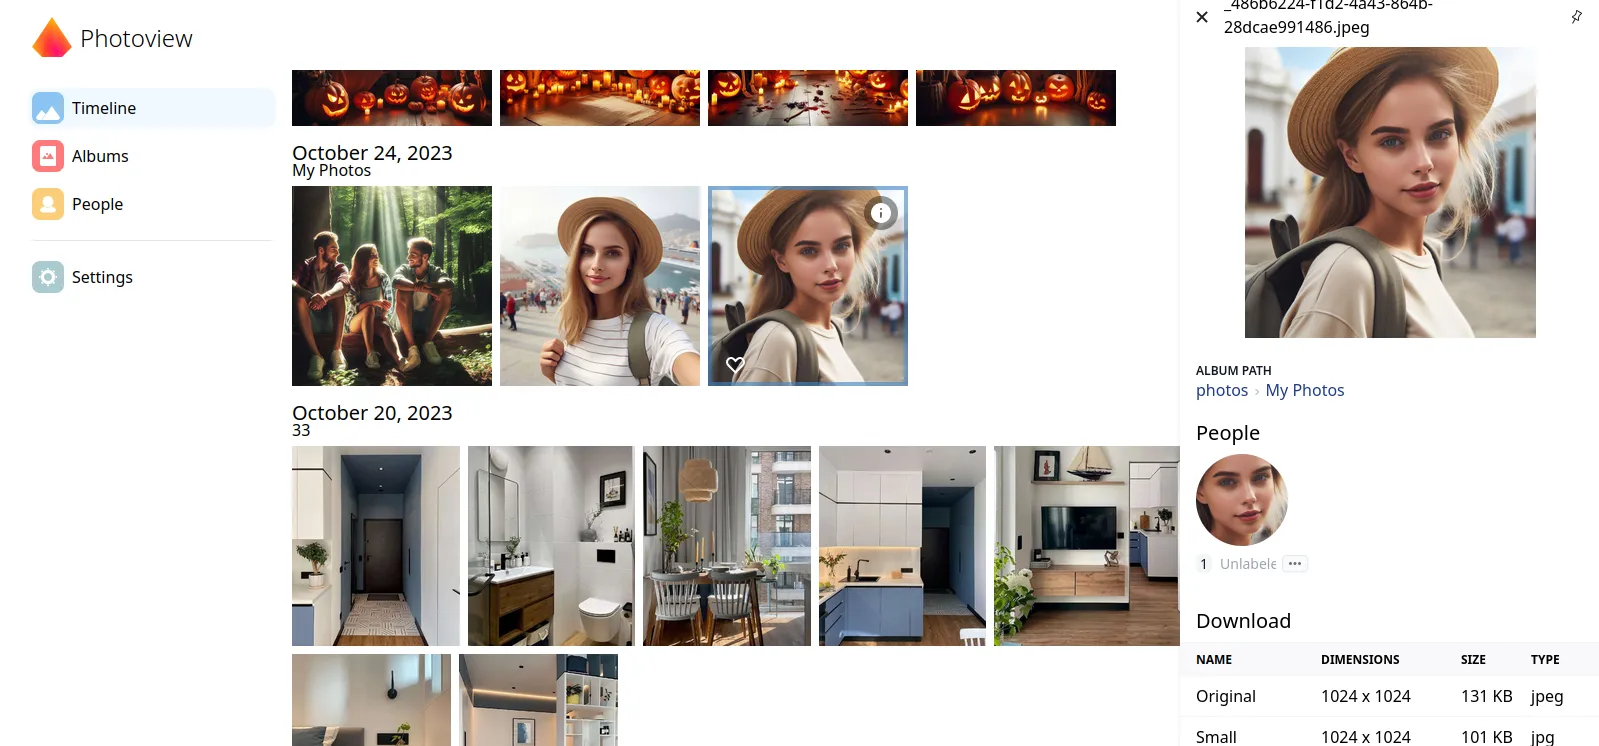 Web interface of the server program for storing photos Photoview